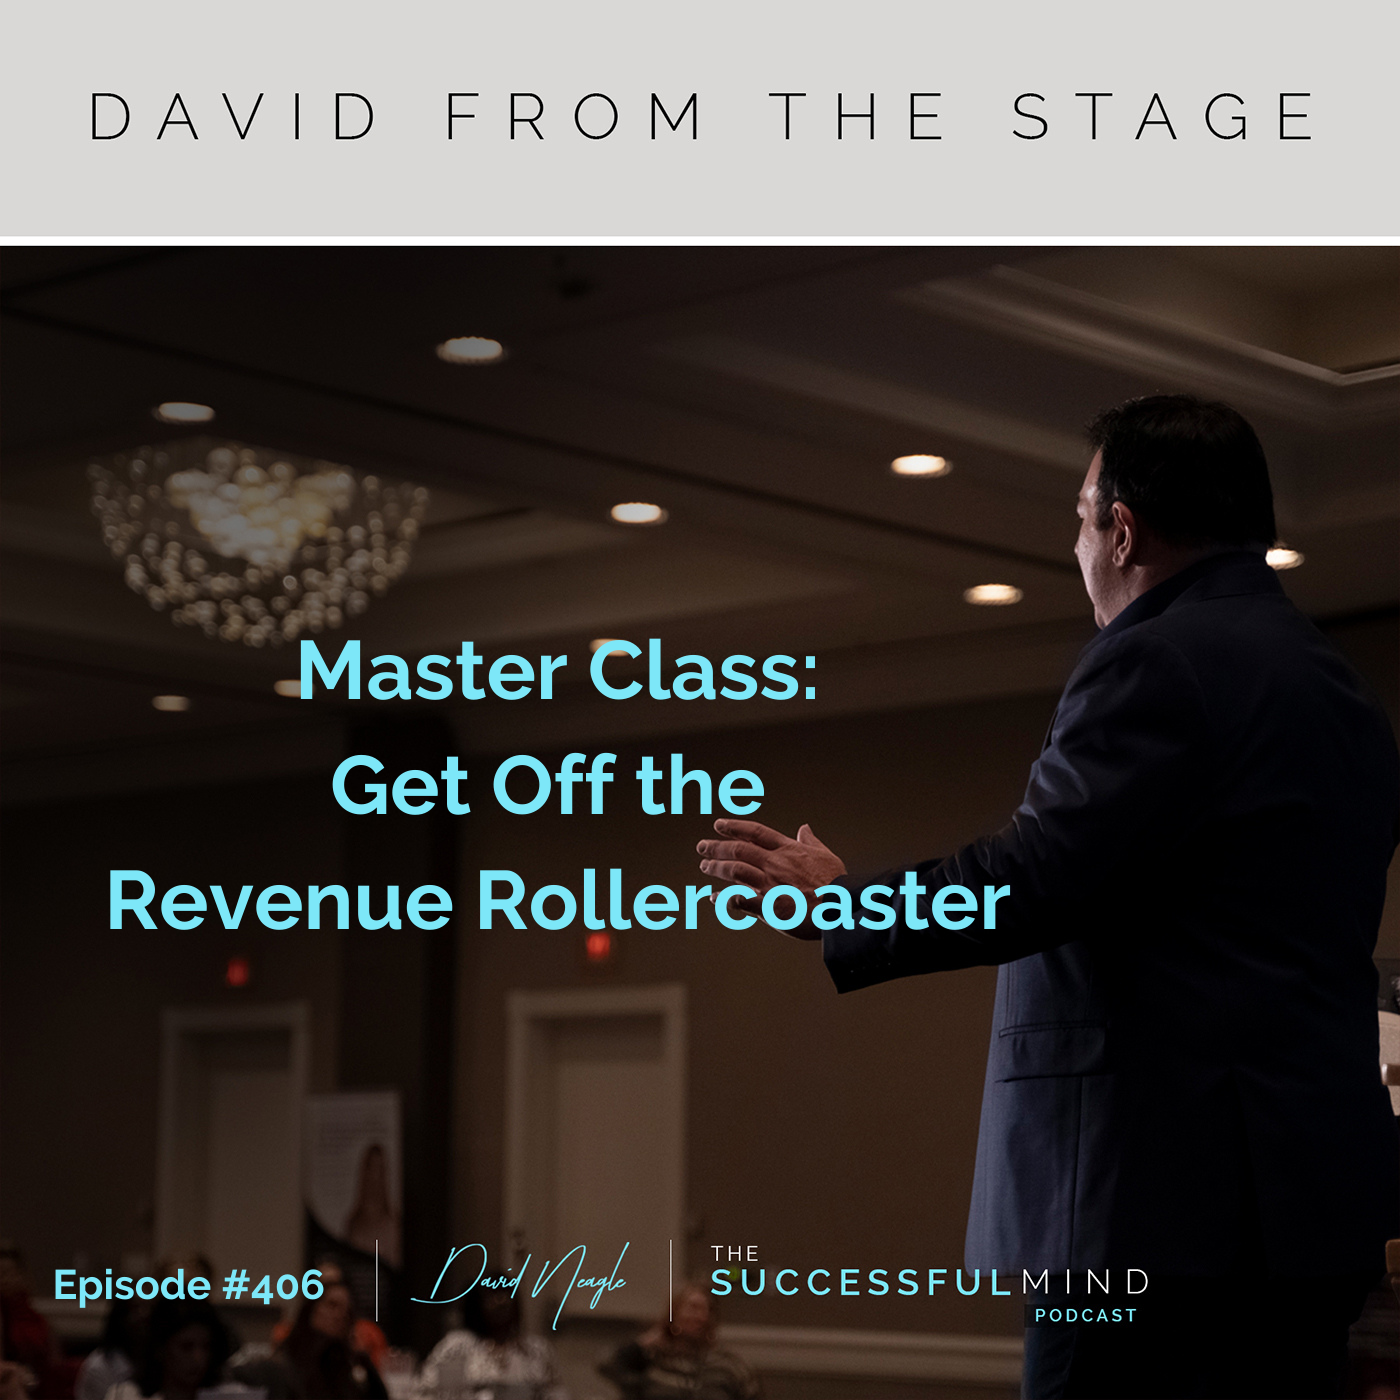 David From The Stage: Master Class - Get Off The Revenue Rollercoaster